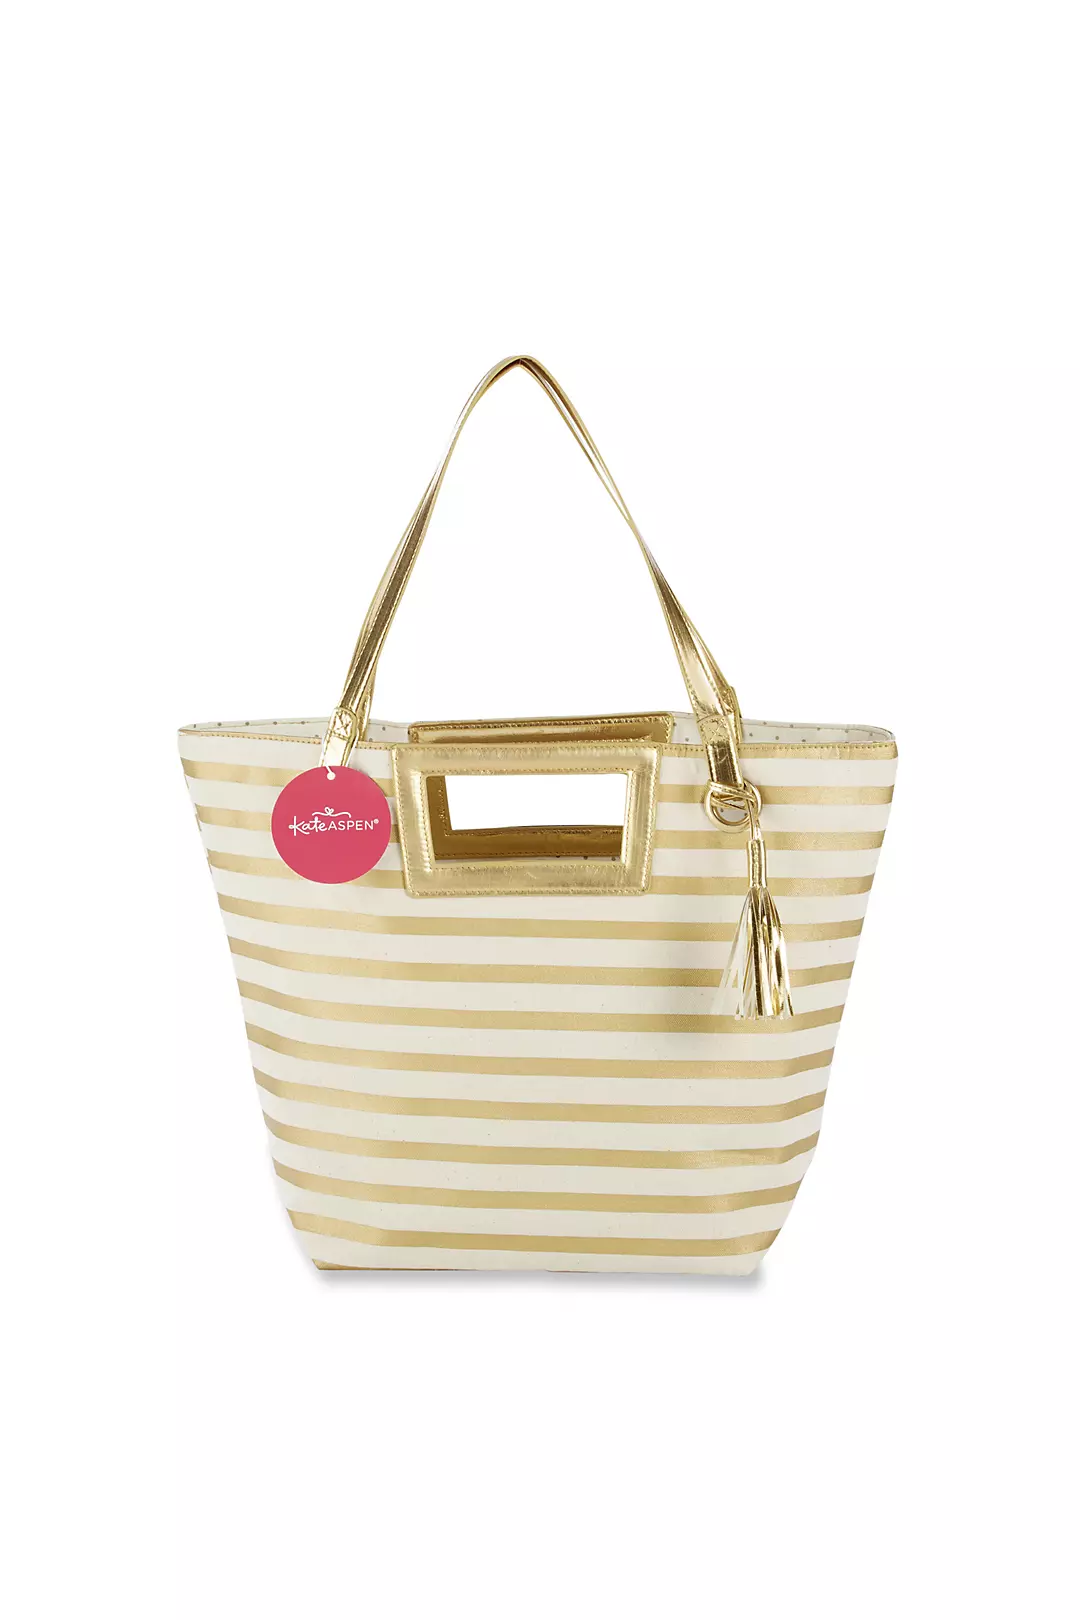 Striped Metallic Gold Canvas Tote With Tassel Image